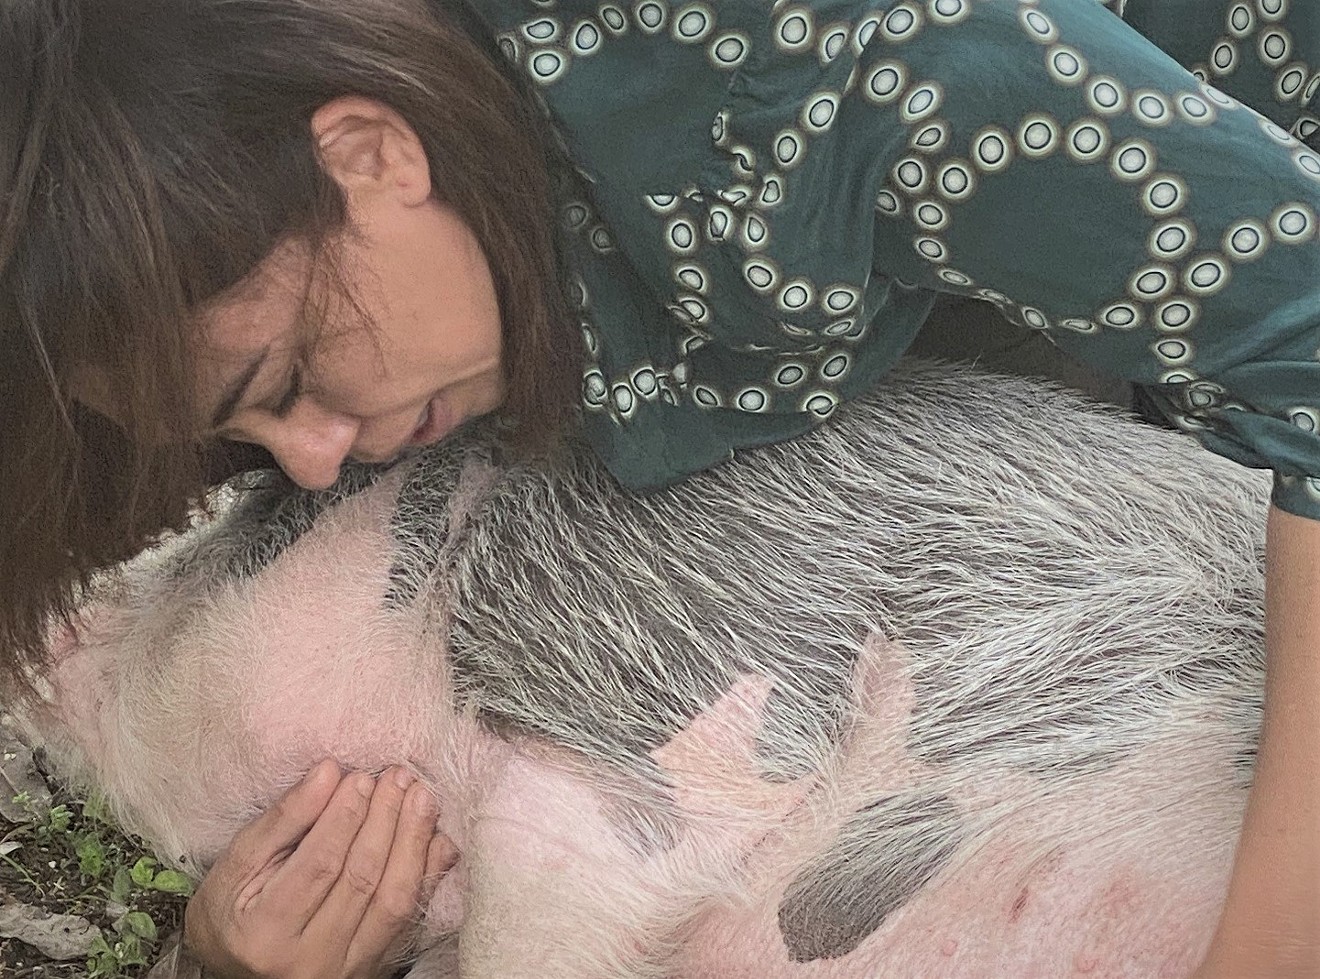 Berenice Deane comforts a recovering Wilbur the Pig.